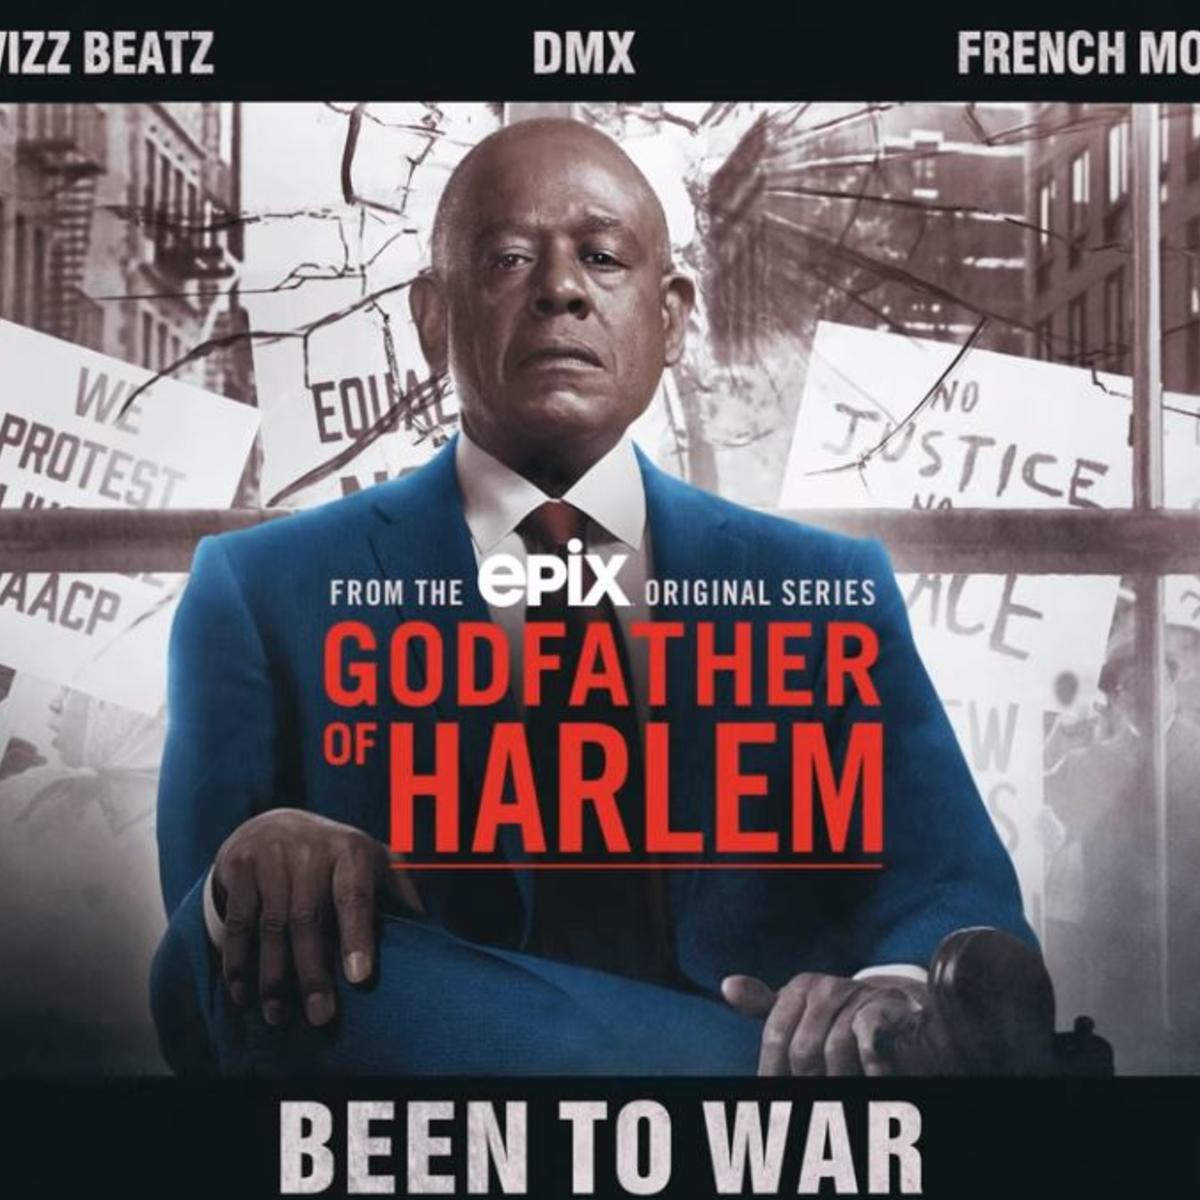 DMX, Swizz Beatz, & French Montana’s “Been To War” Song Hits Streaming Services